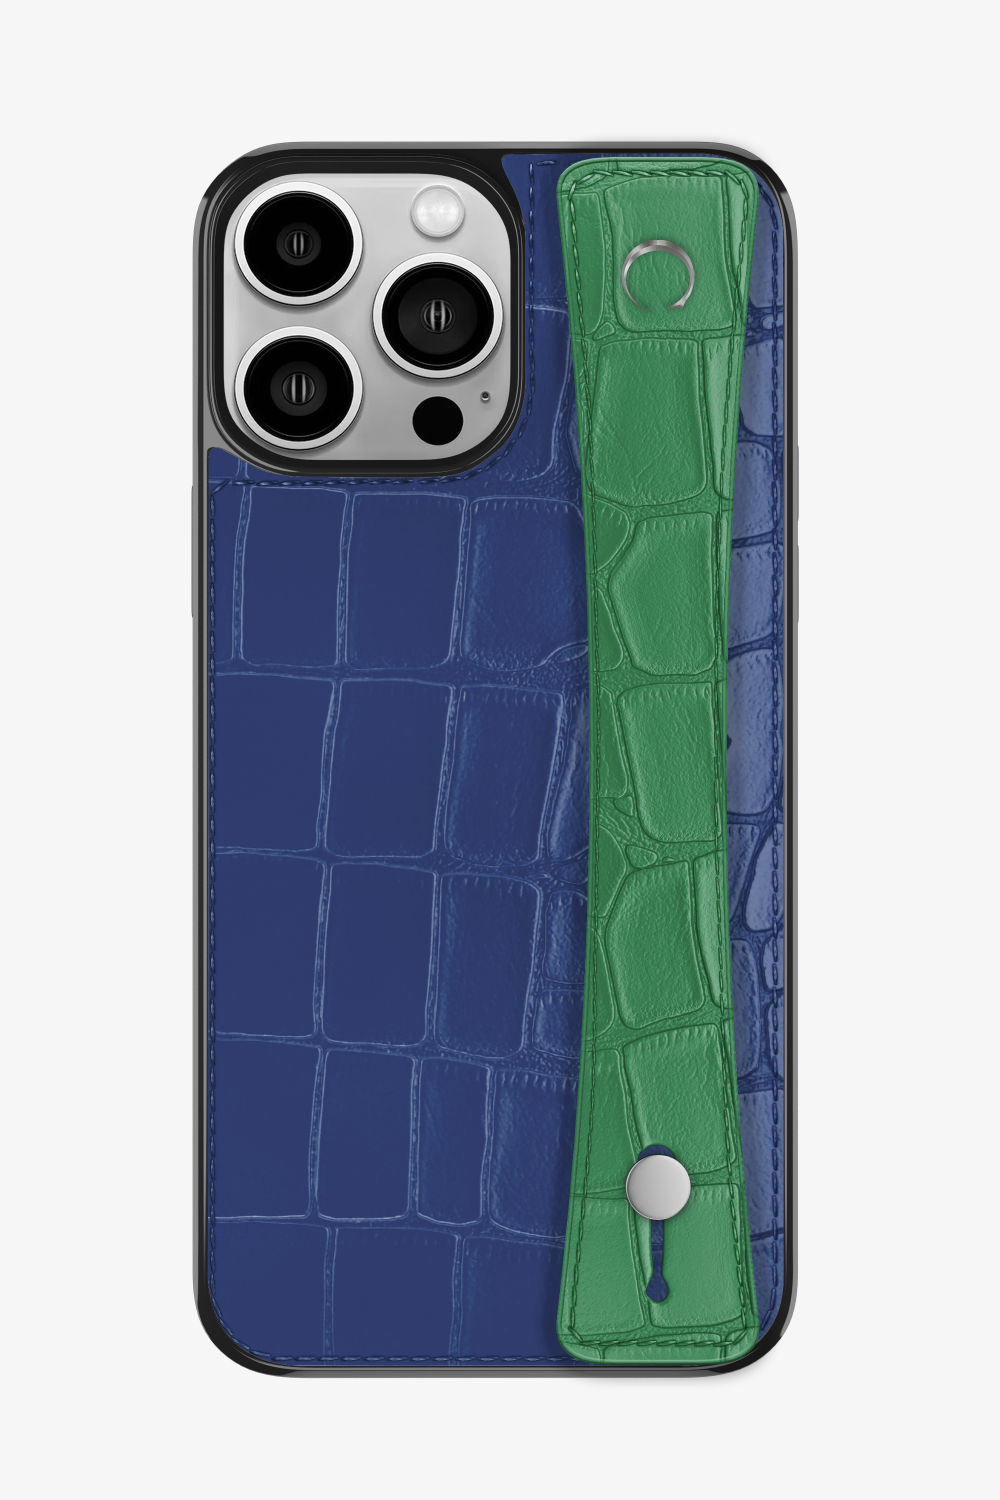 Alligator Sports Strap Case for iPhone 14 Pro Max - Navy Blue / Green Emerald - zollofrance